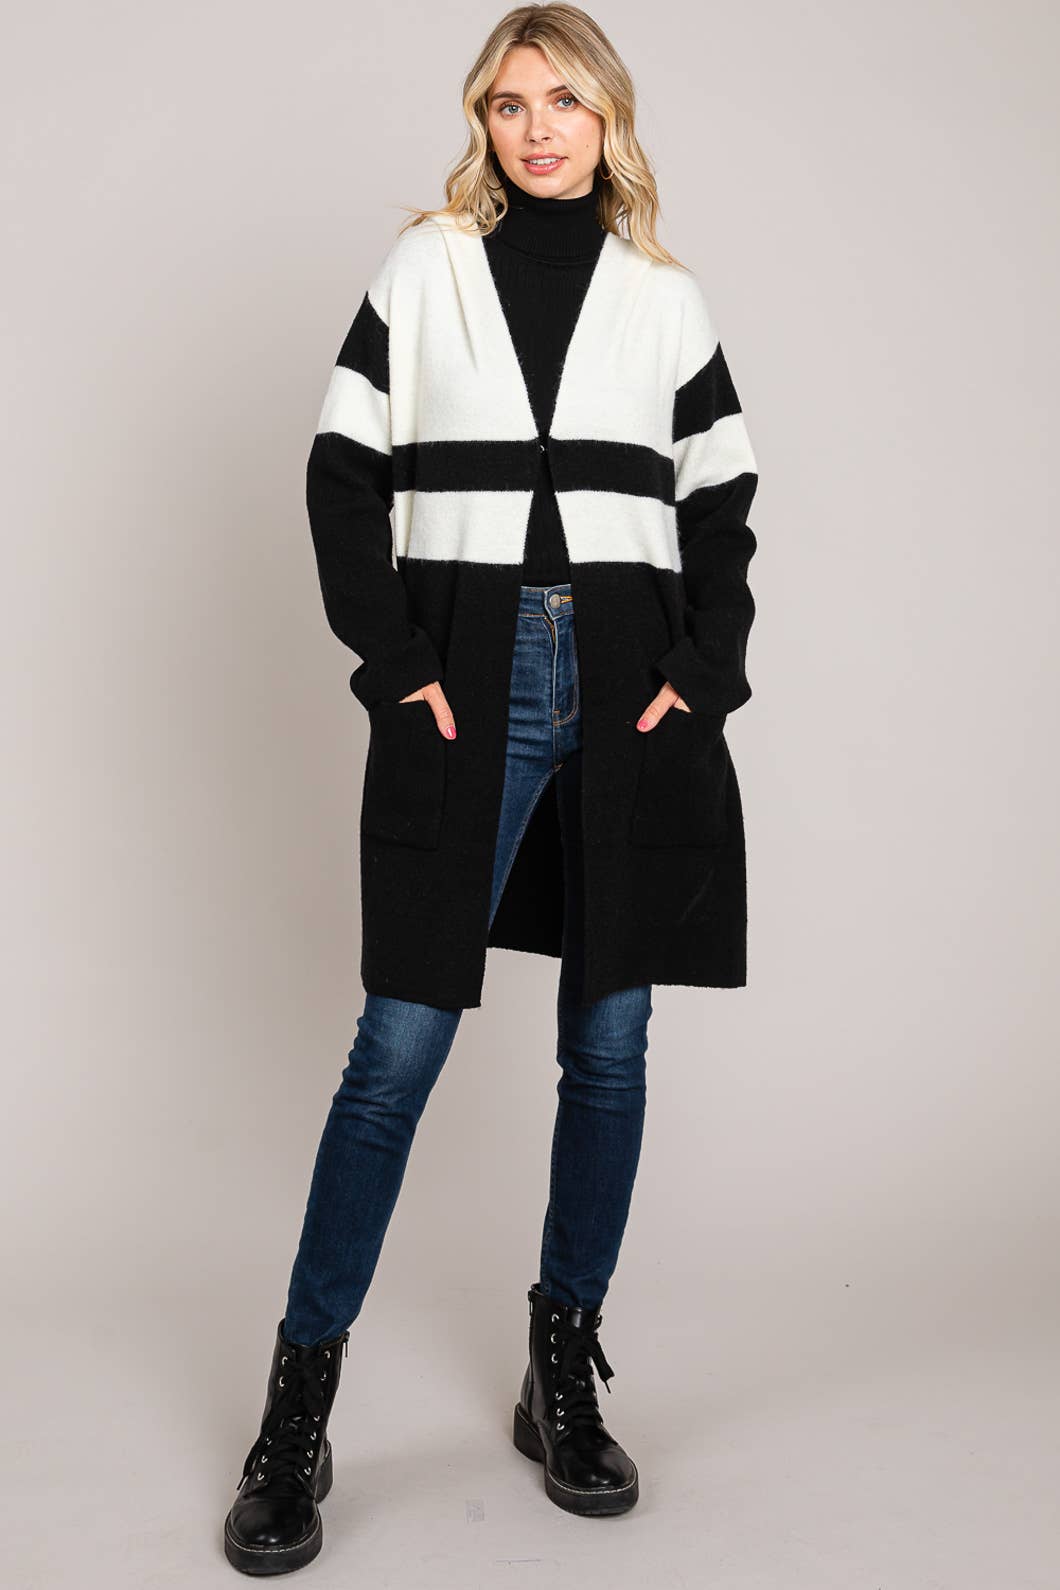 Casual Everyday Women's Black and White Hooded Cardigan